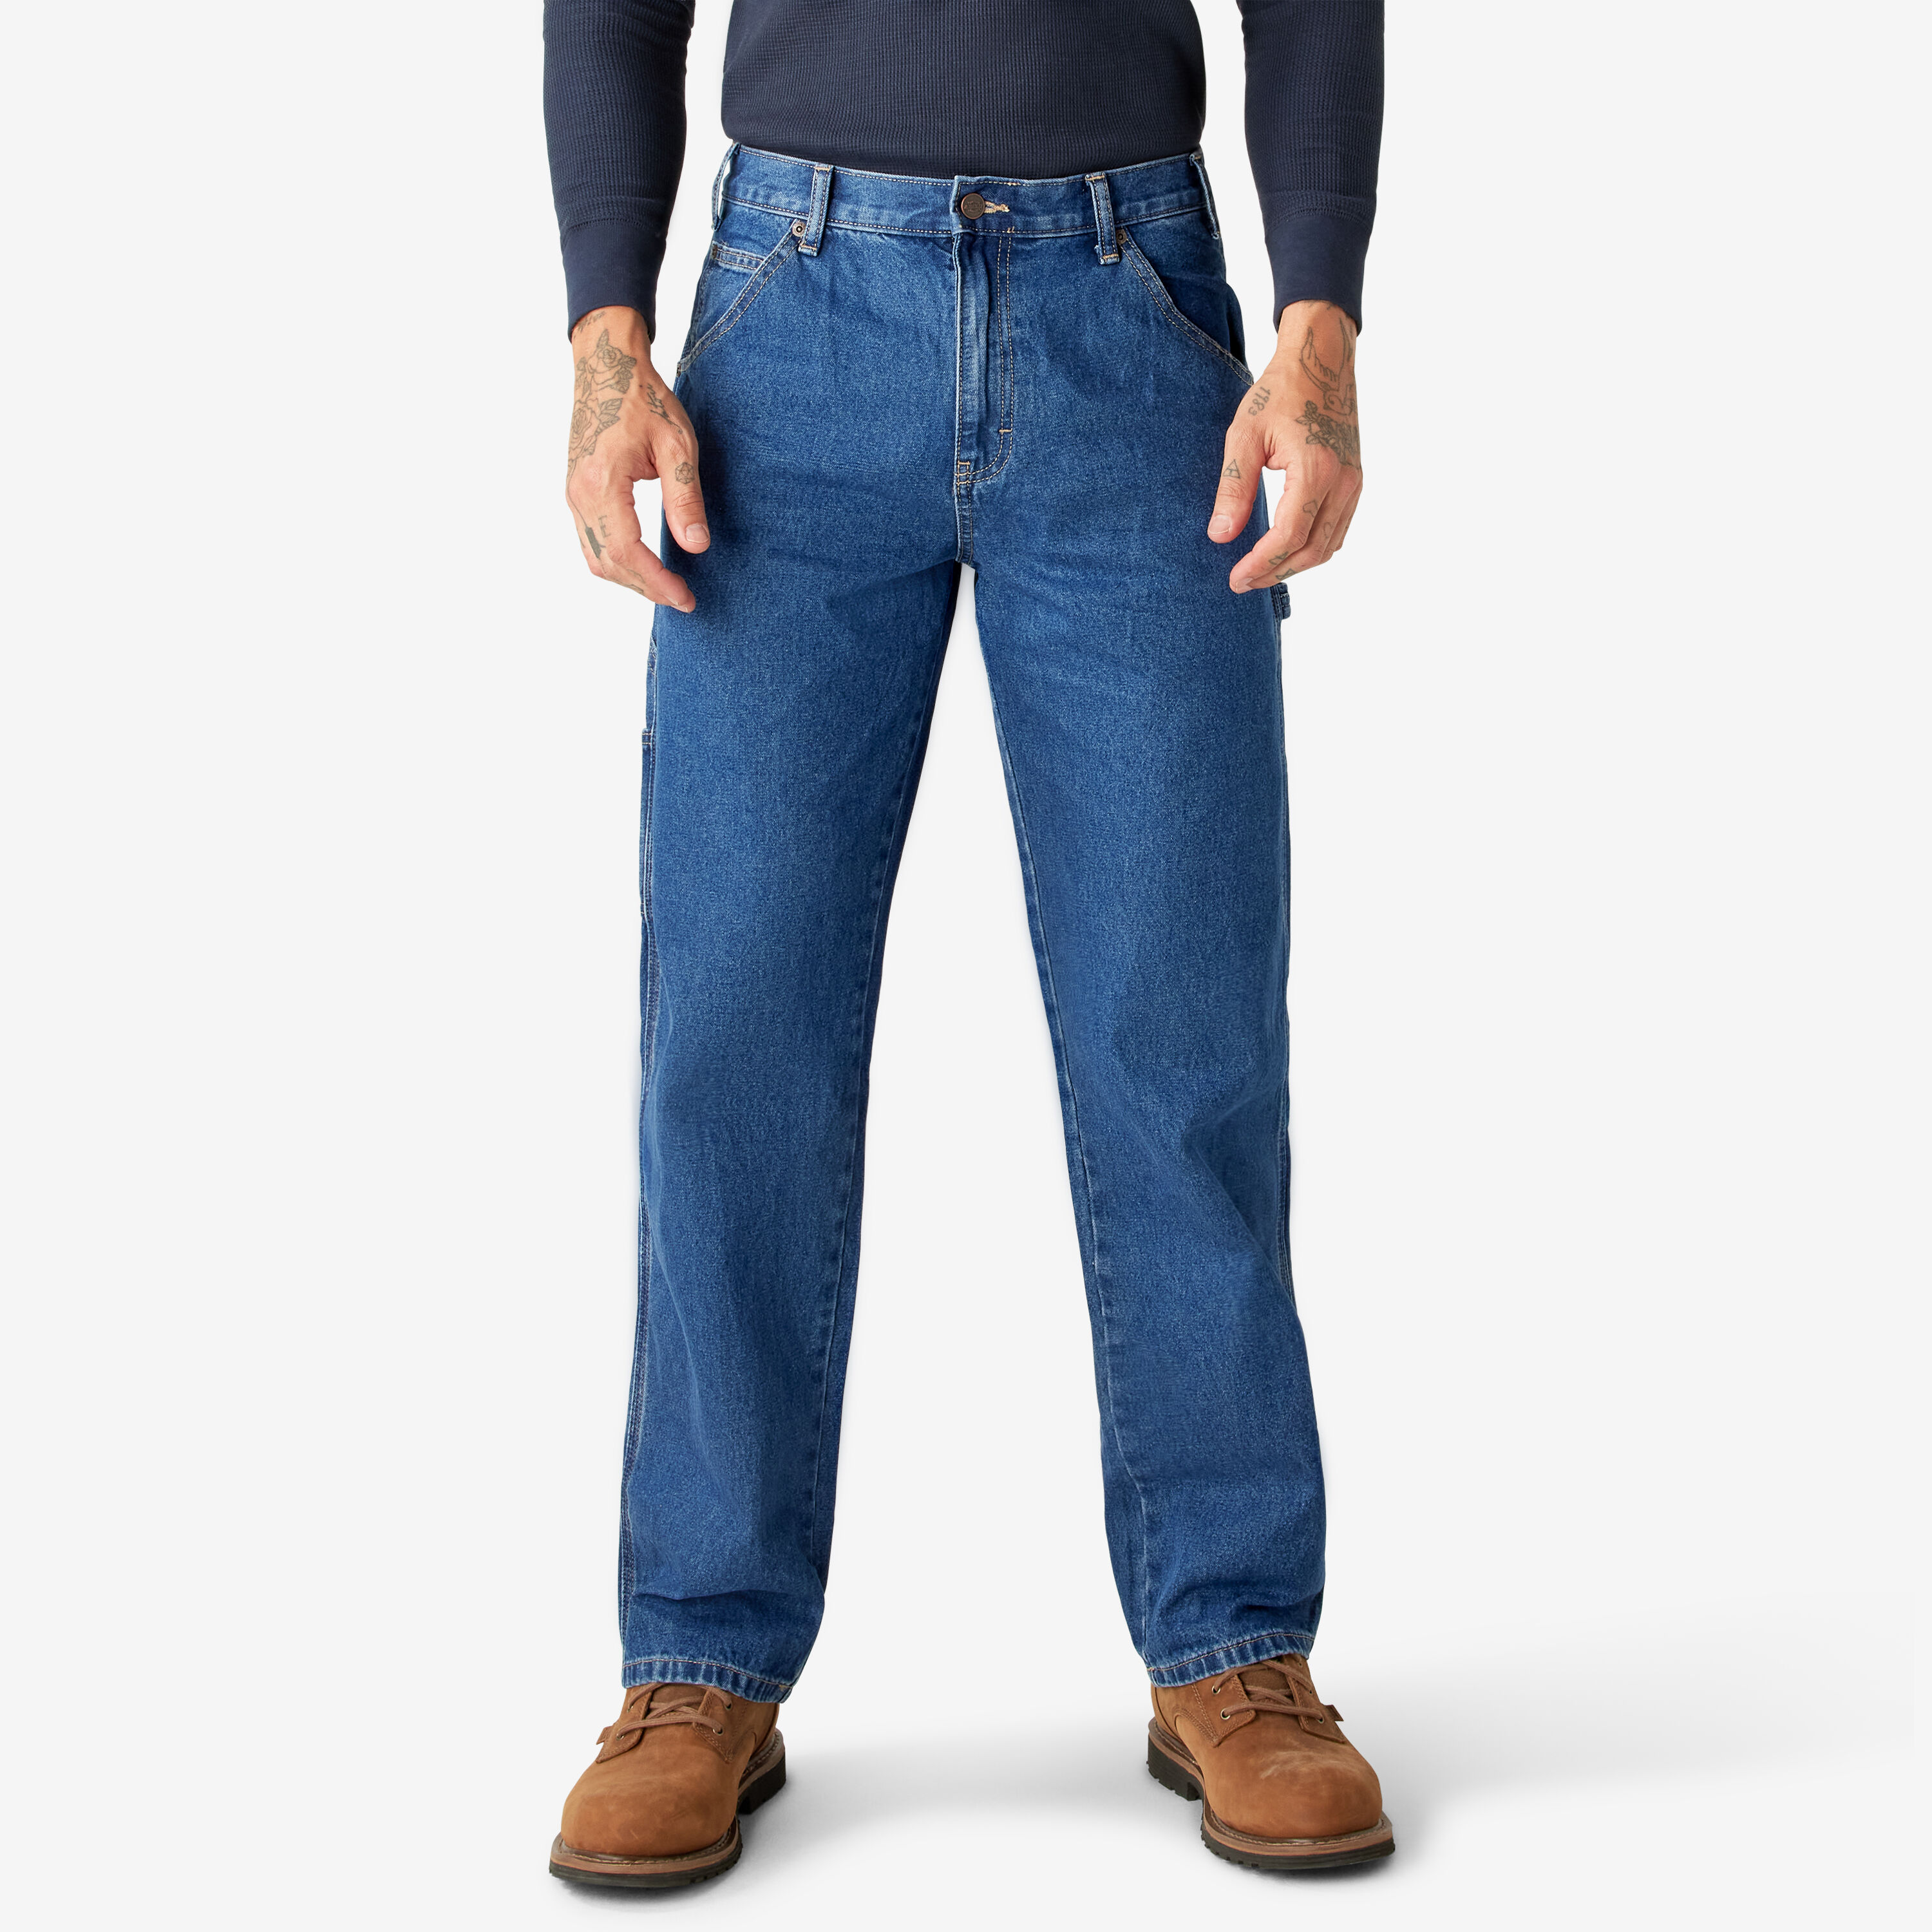 relaxed mens jeans